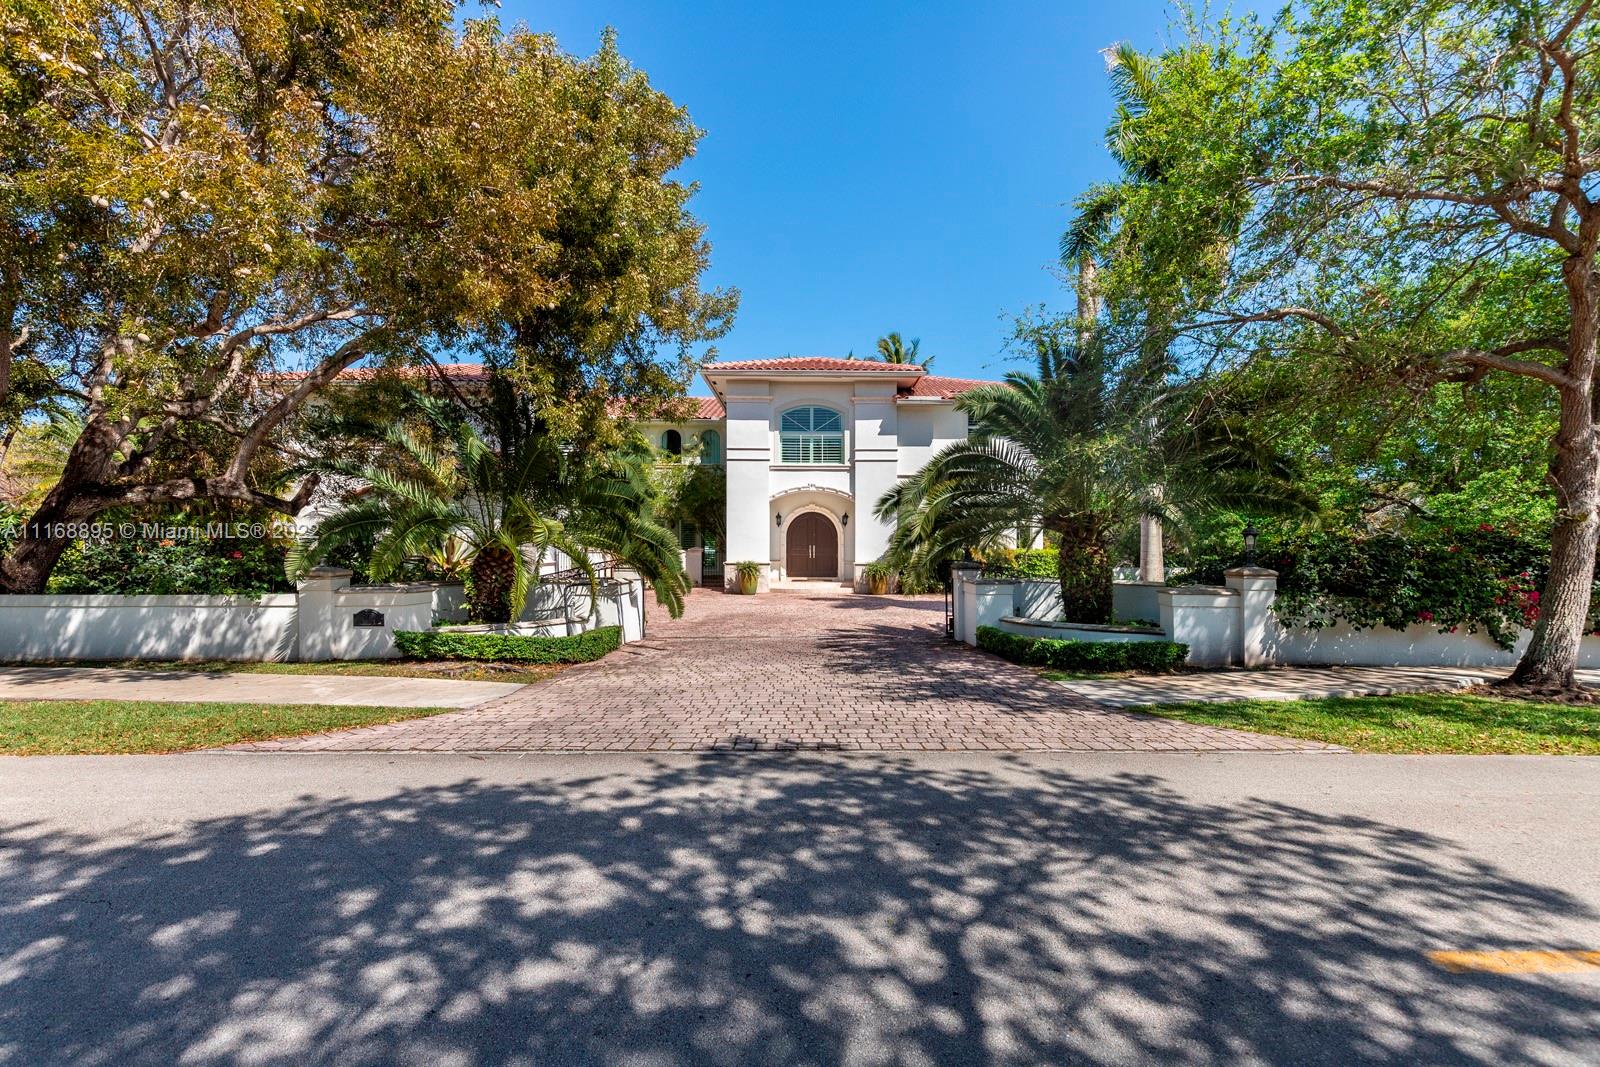 Enjoy Pinecrest living at its finest in this 6 bedroom, 7 bathroom gated estate located on a 40,336 SF corner lot. Upon entering you will be greeted by bright, natural light, a wood-burning fireplace, and soaring 22 ft ceilings that lure you out to a covered terrace and pool area. The primary bedroom features two large walk-in closets and private terraces that overlook your luscious backyard. Other features include: 3-car garage, high-impact windows, and doors, and a partial home generator.